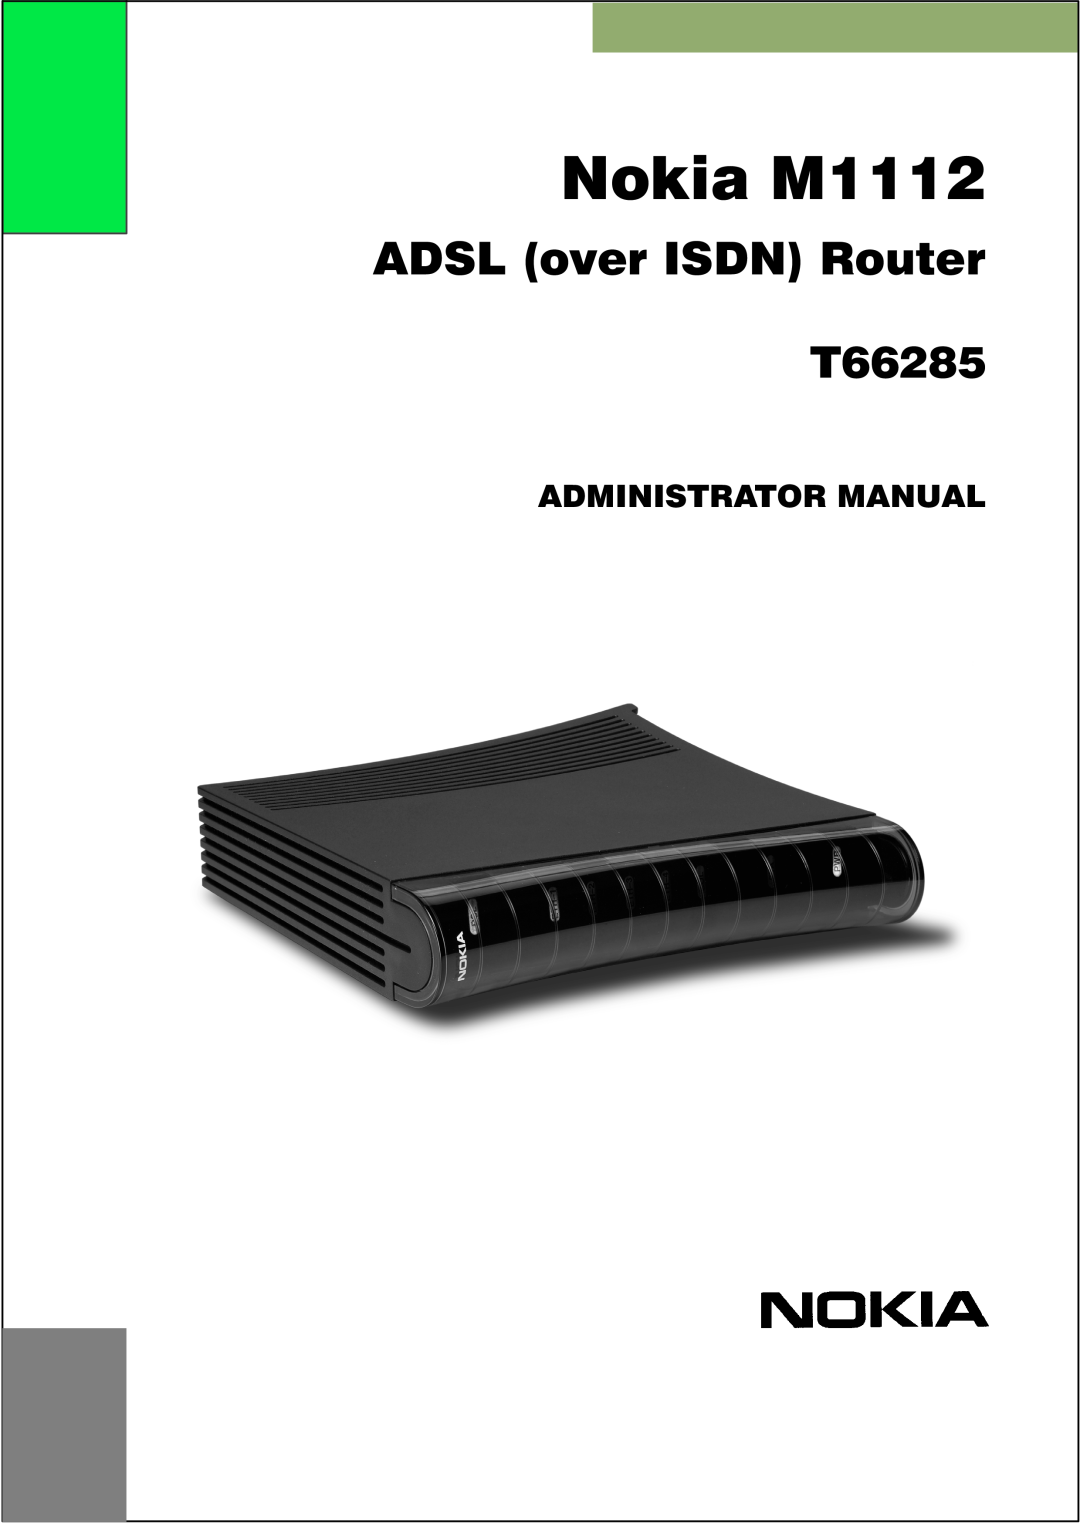 Nokia manual Nokia M1112, ADSL over ISDN Router, T66285, Administrator Manual 